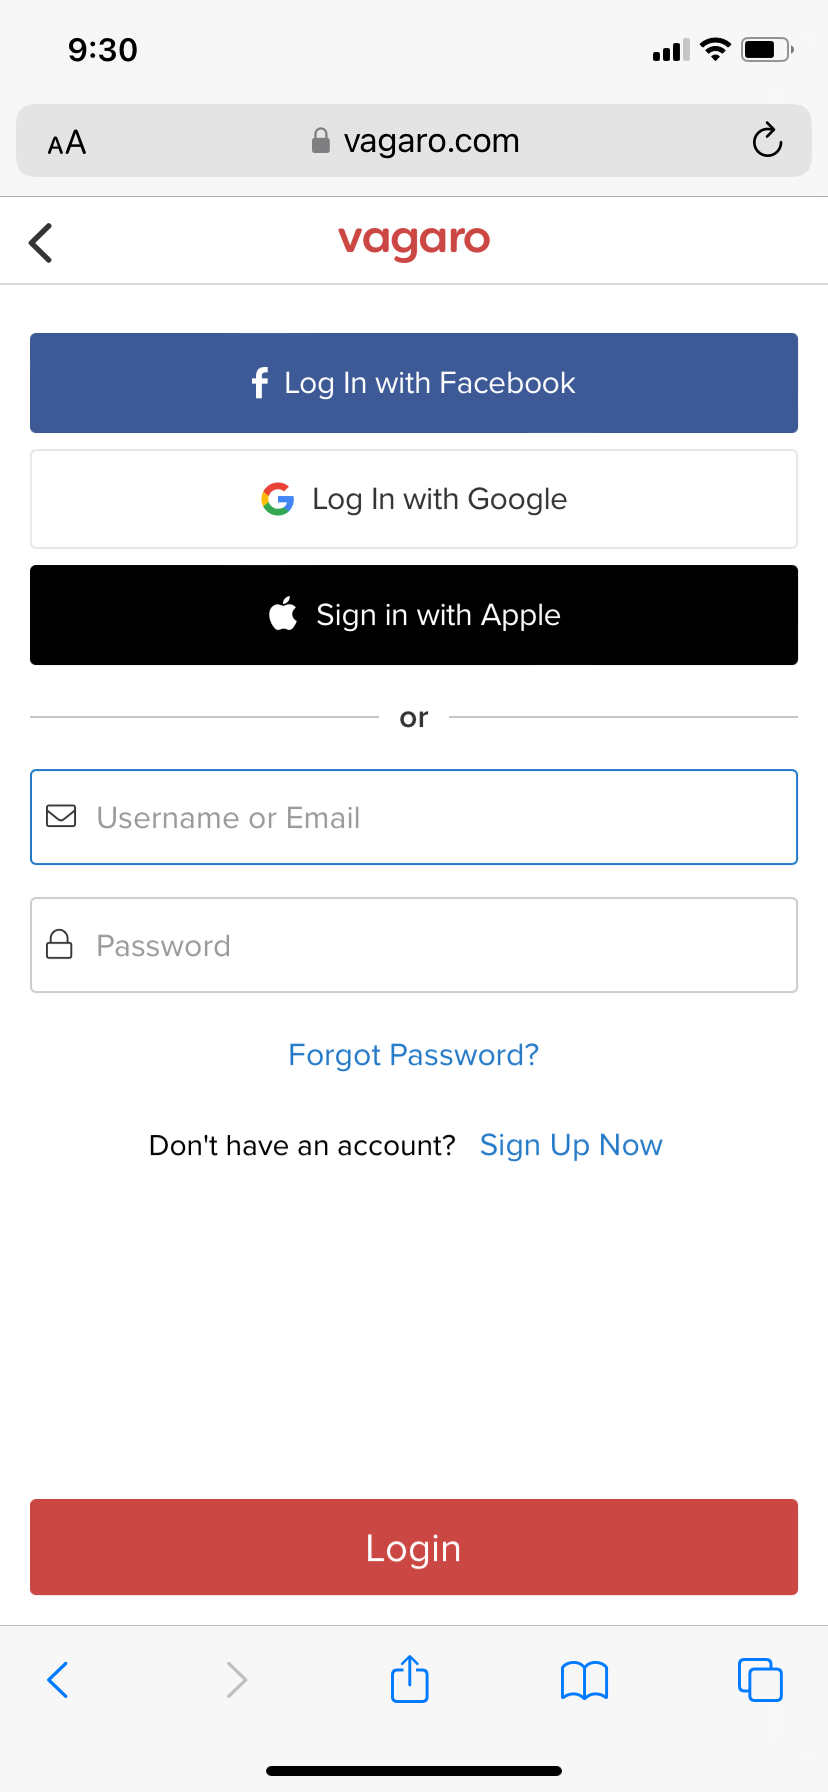  Login with your<br>email and password